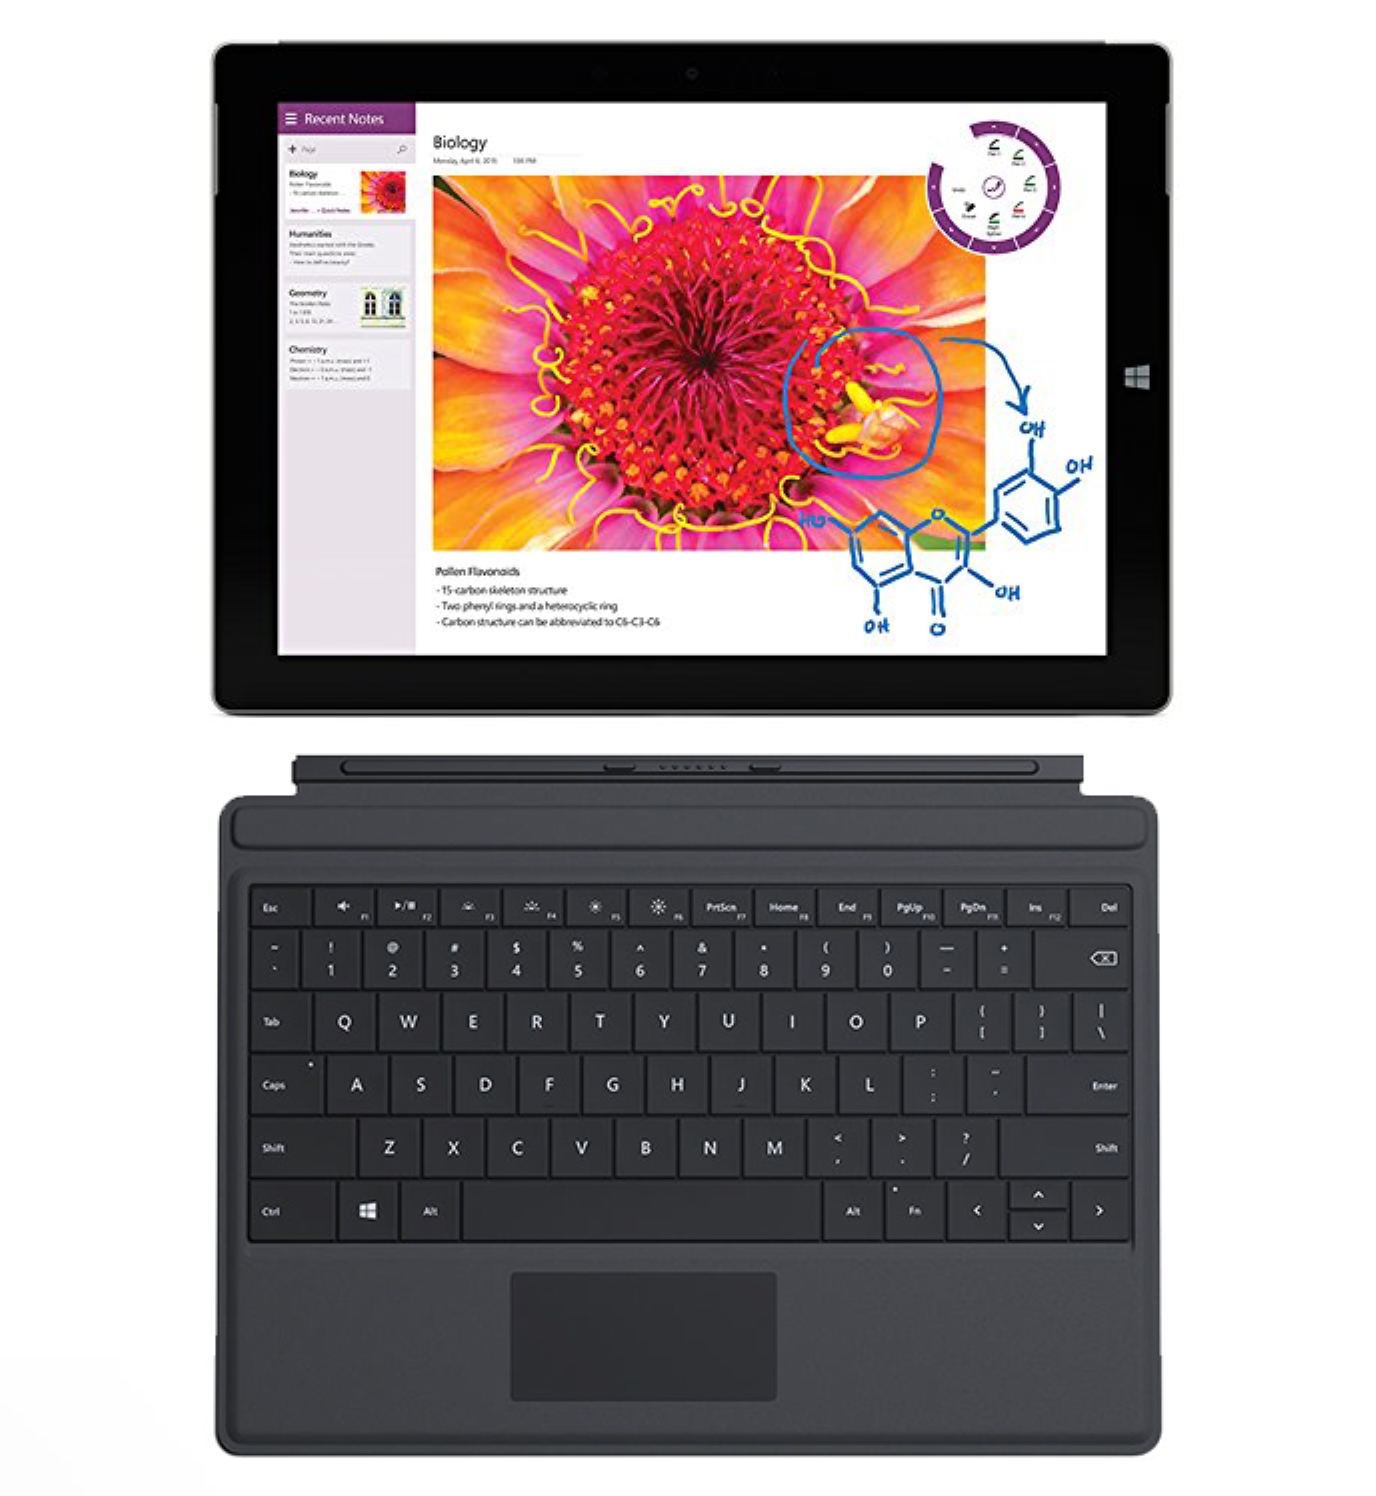 Microsoft Surface 3 10.8" Touchscreen 4GB 128GB SSD WiF i+ 4G LTE Tablet GL4-00009 with Type Cover (Used, Scratches) - image 1 of 9